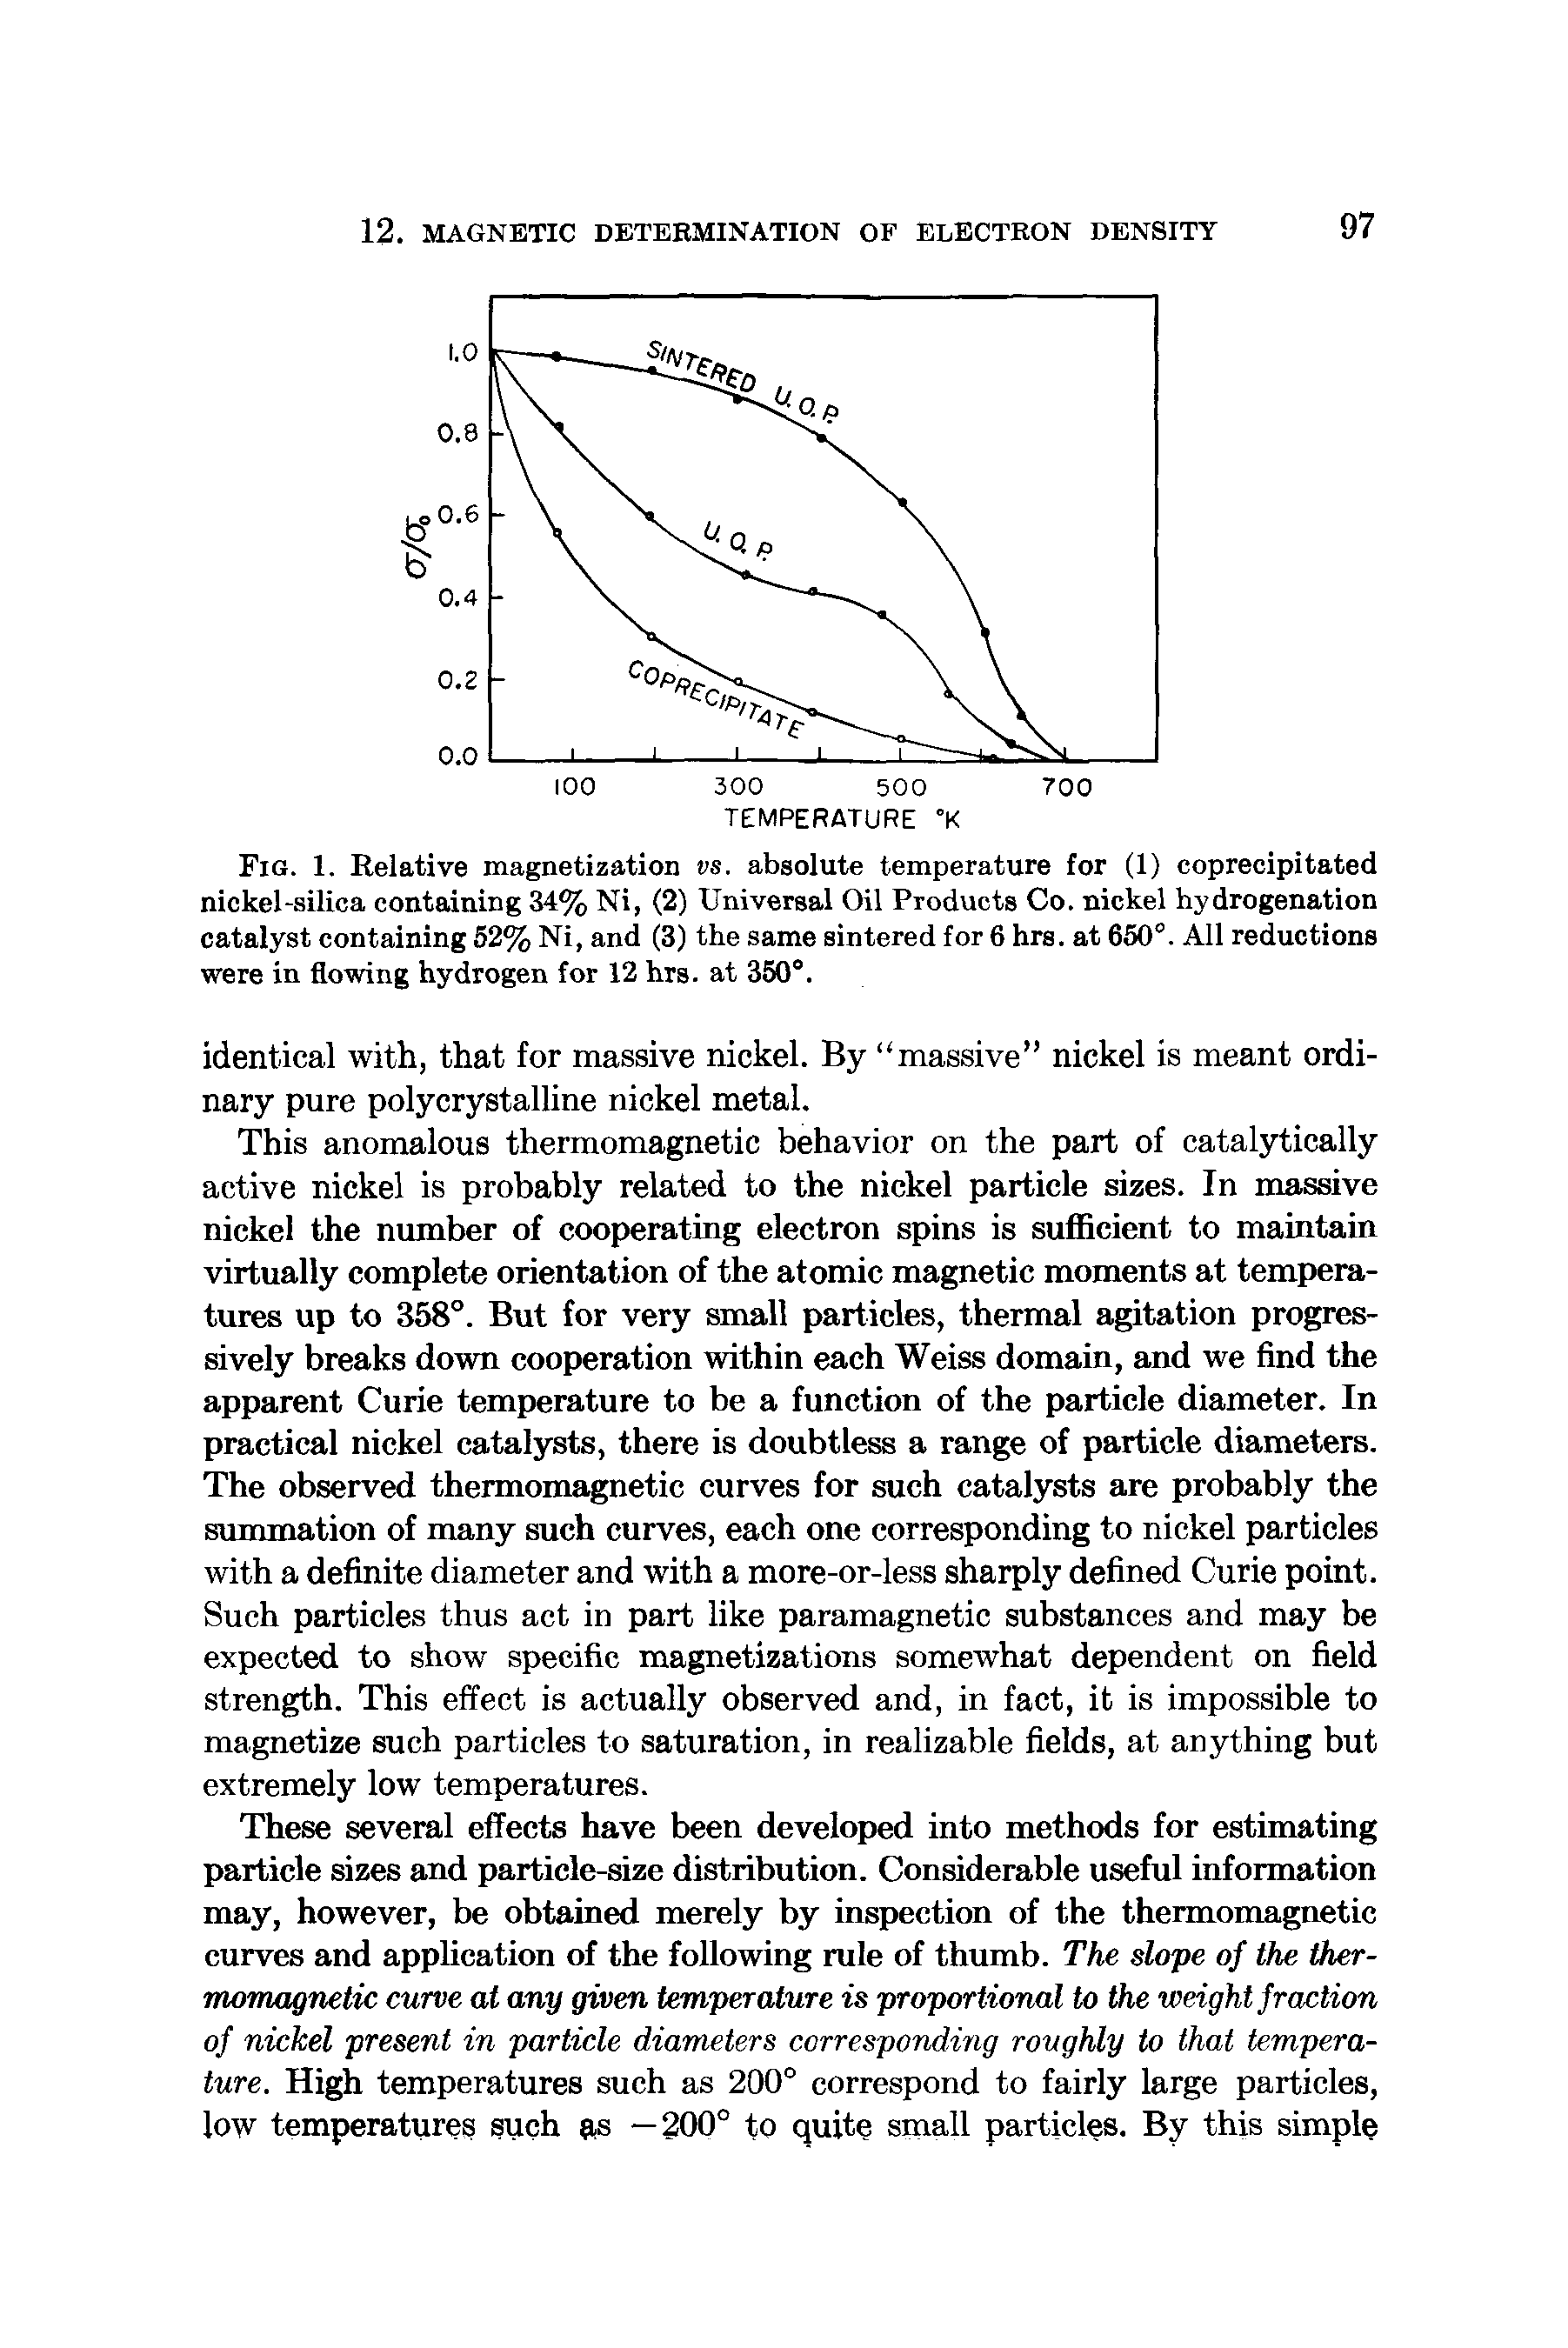 Fig. 1. Relative magnetization vs. absolute temperature for (1) coprecipitated nickel-silica containing 34% Ni, (2) Universal Oil Products Co. nickel hydrogenation catalyst containing 52% Ni, and (3) the same sintered for 6 hrs. at 650°. All reductions were in flowing hydrogen for 12 hrs. at 350°.